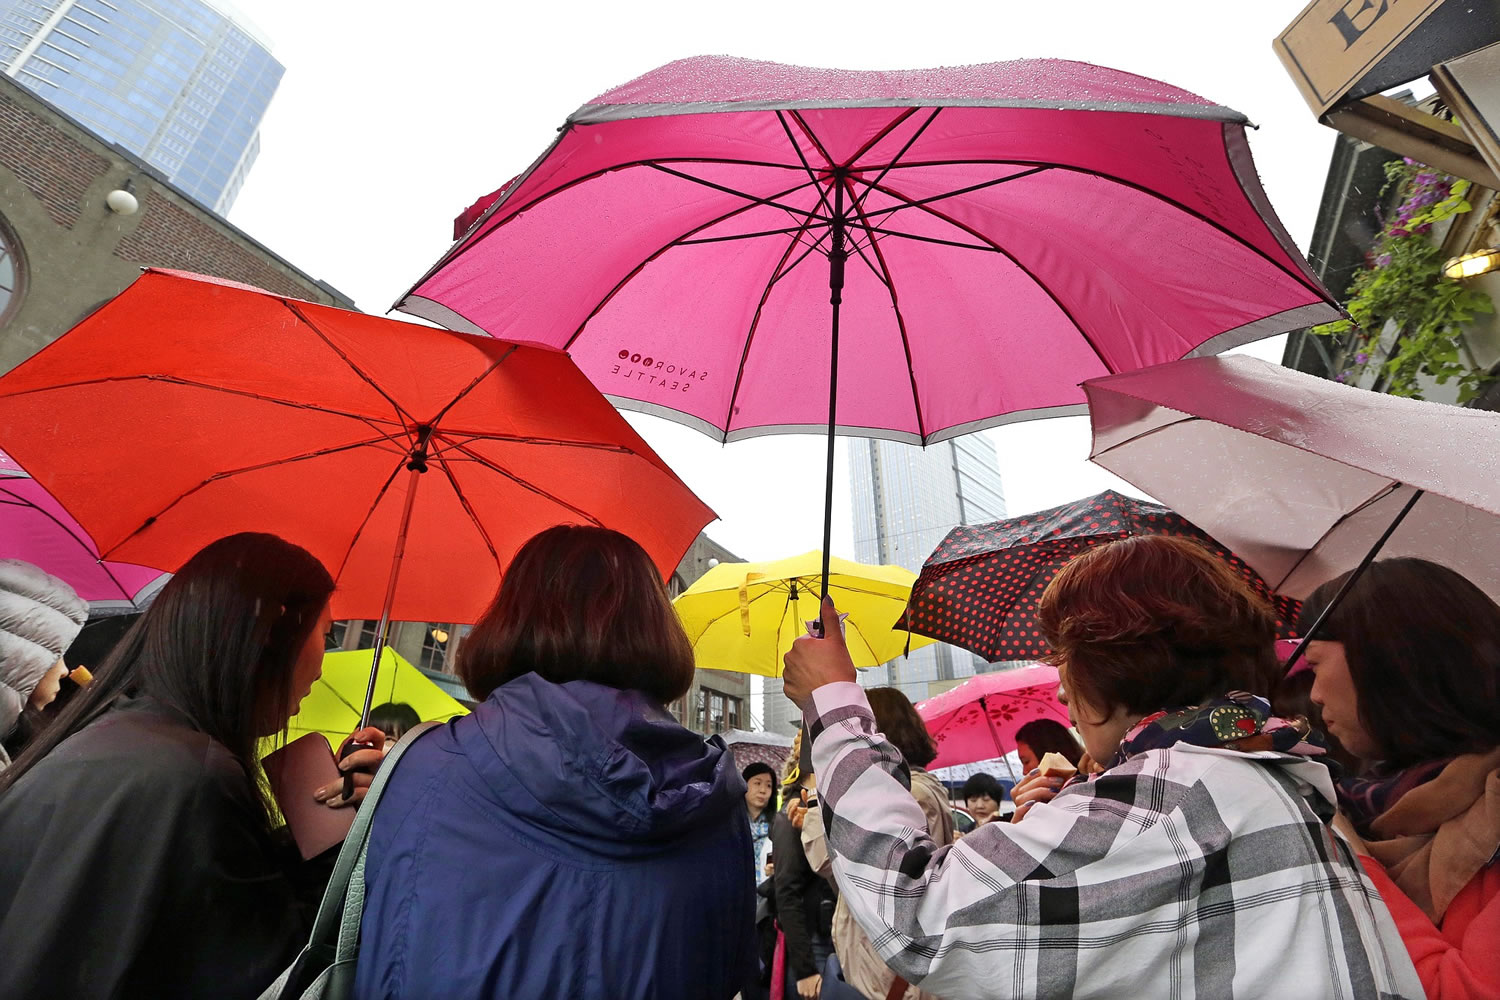 A group of tourists from Korea huddle under umbrellas at the Pike Place Market on Wednesday morning in Seattle.